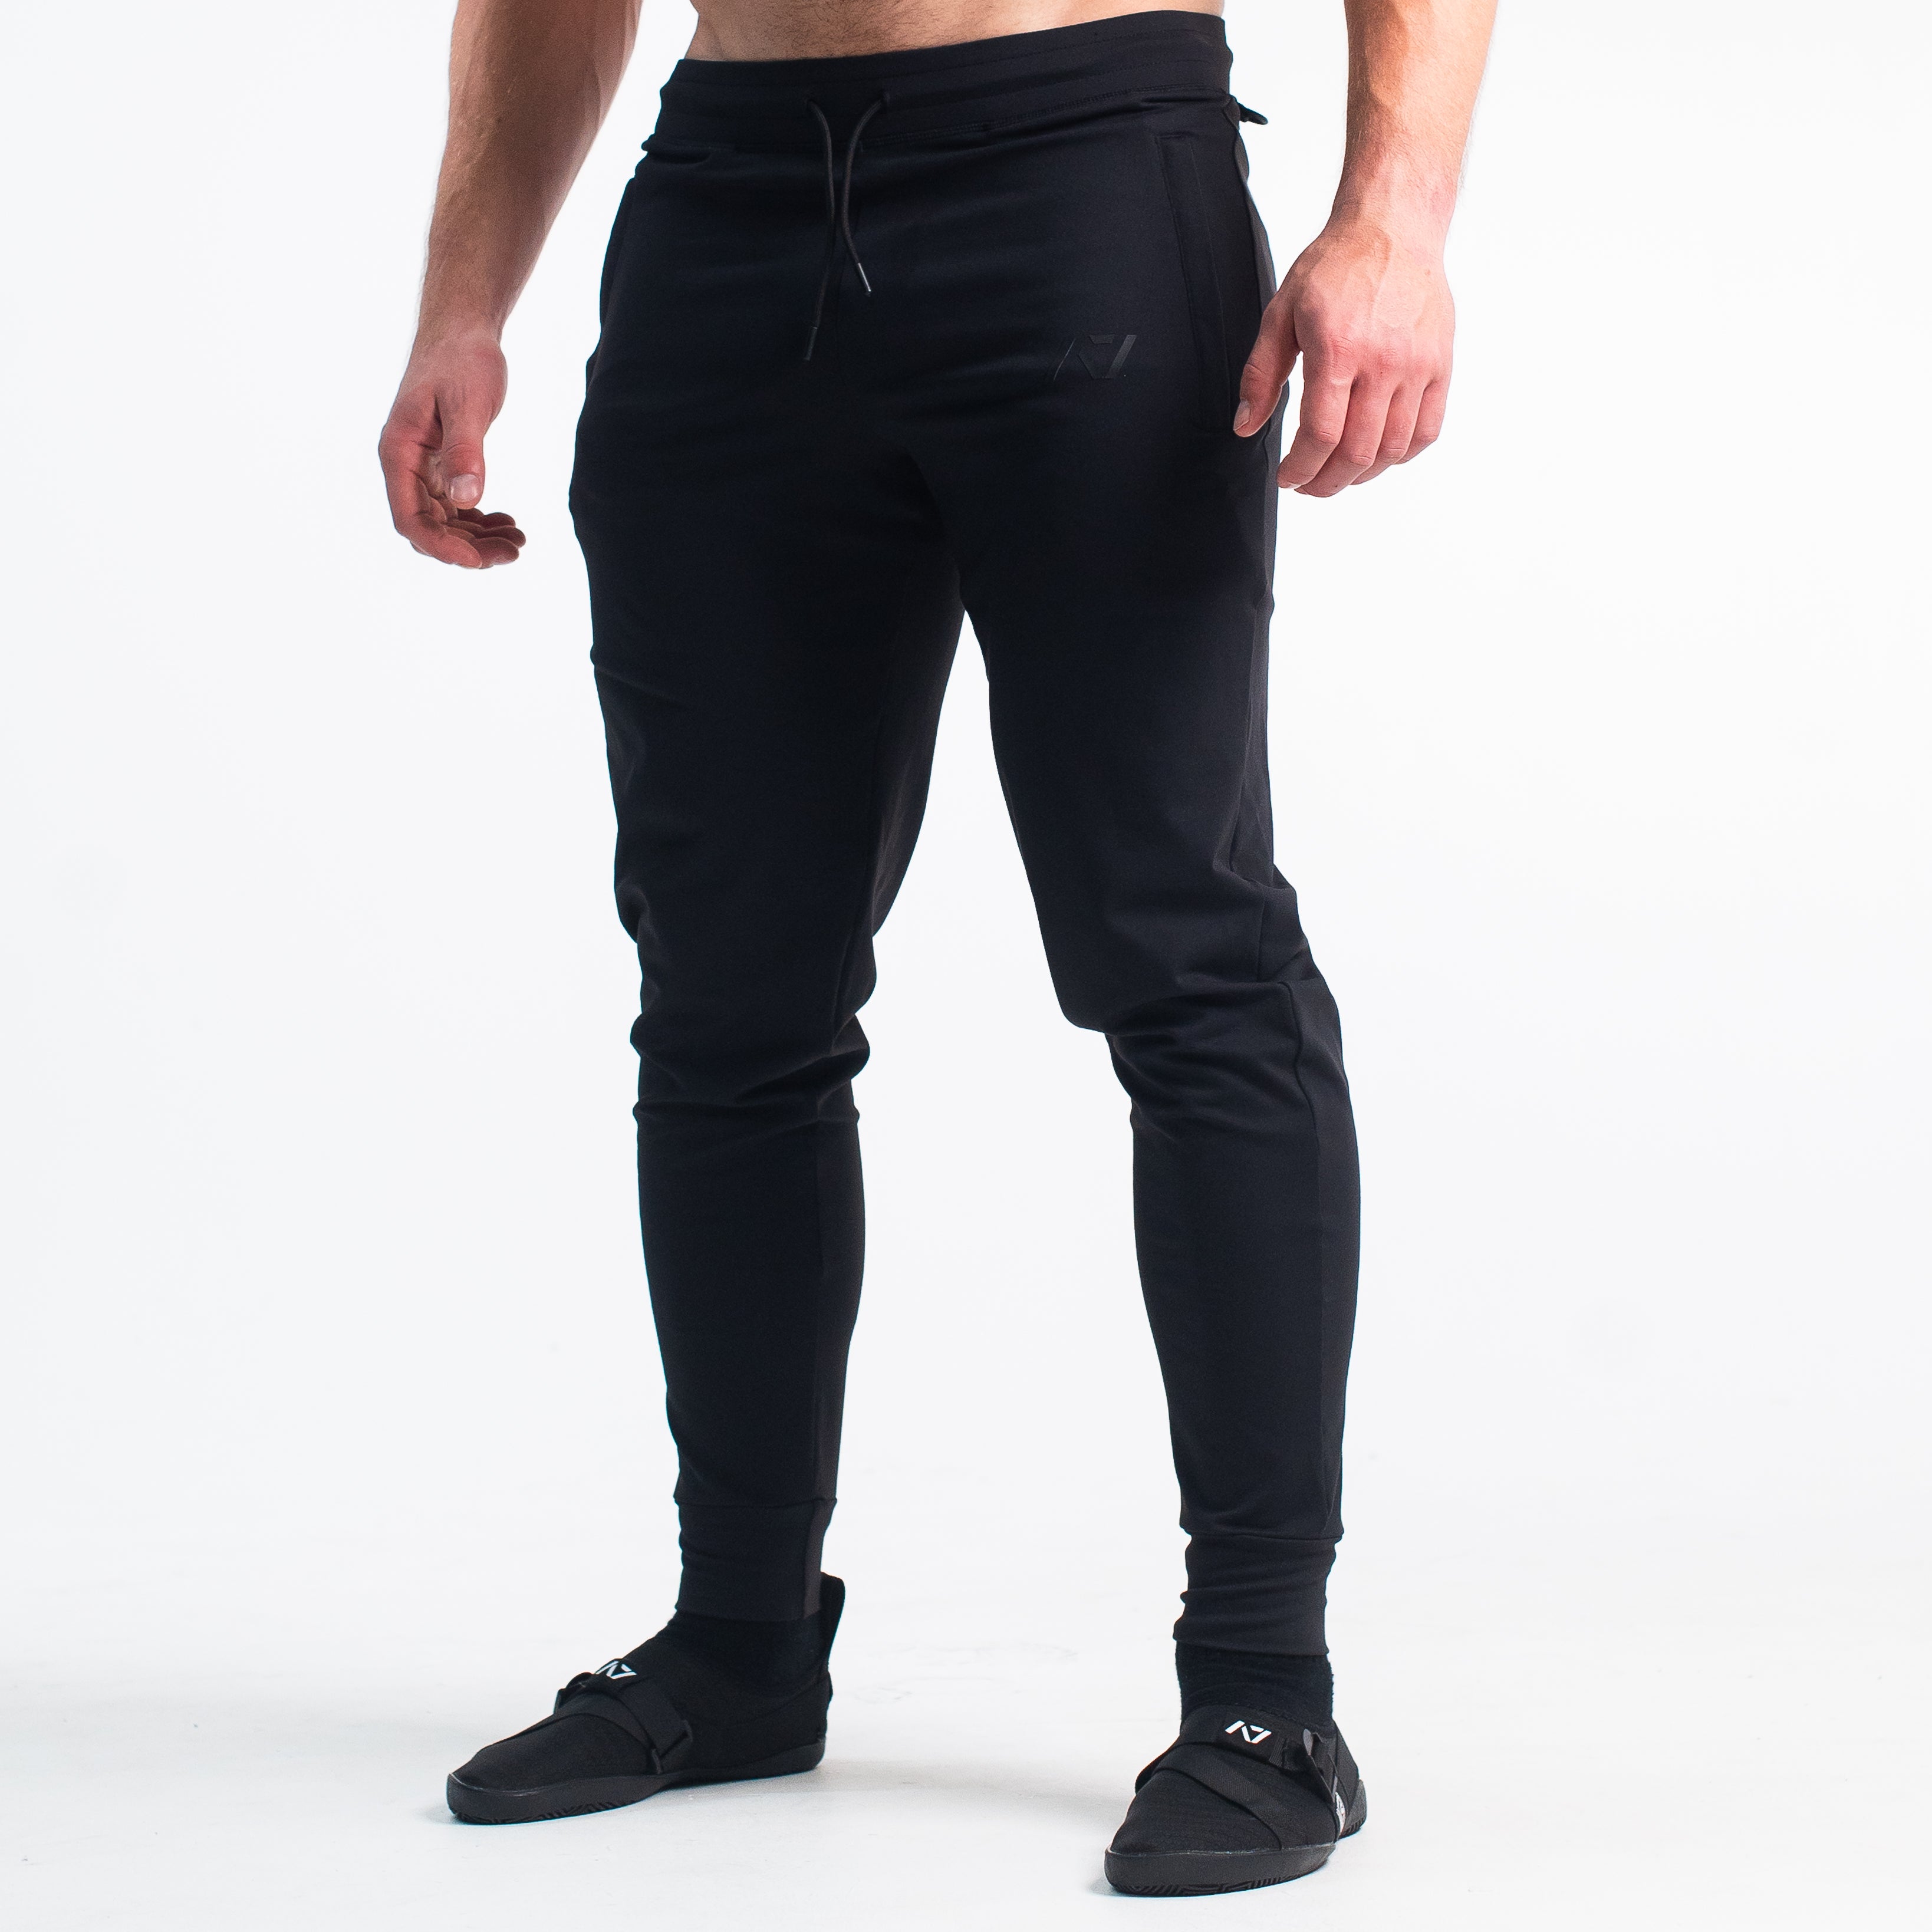 Defy joggers are just as comfortable in the gym as they are going out. These are made with premium moisture-wicking 4-way-stretch material for greater range of motion. These are a great fit for both men and women and offer deep zippered pockets and tapered leg design. Purchase Gold Standard Defy Joggers from A7 UK shipping to UK or A7 Europe shipping to EU.